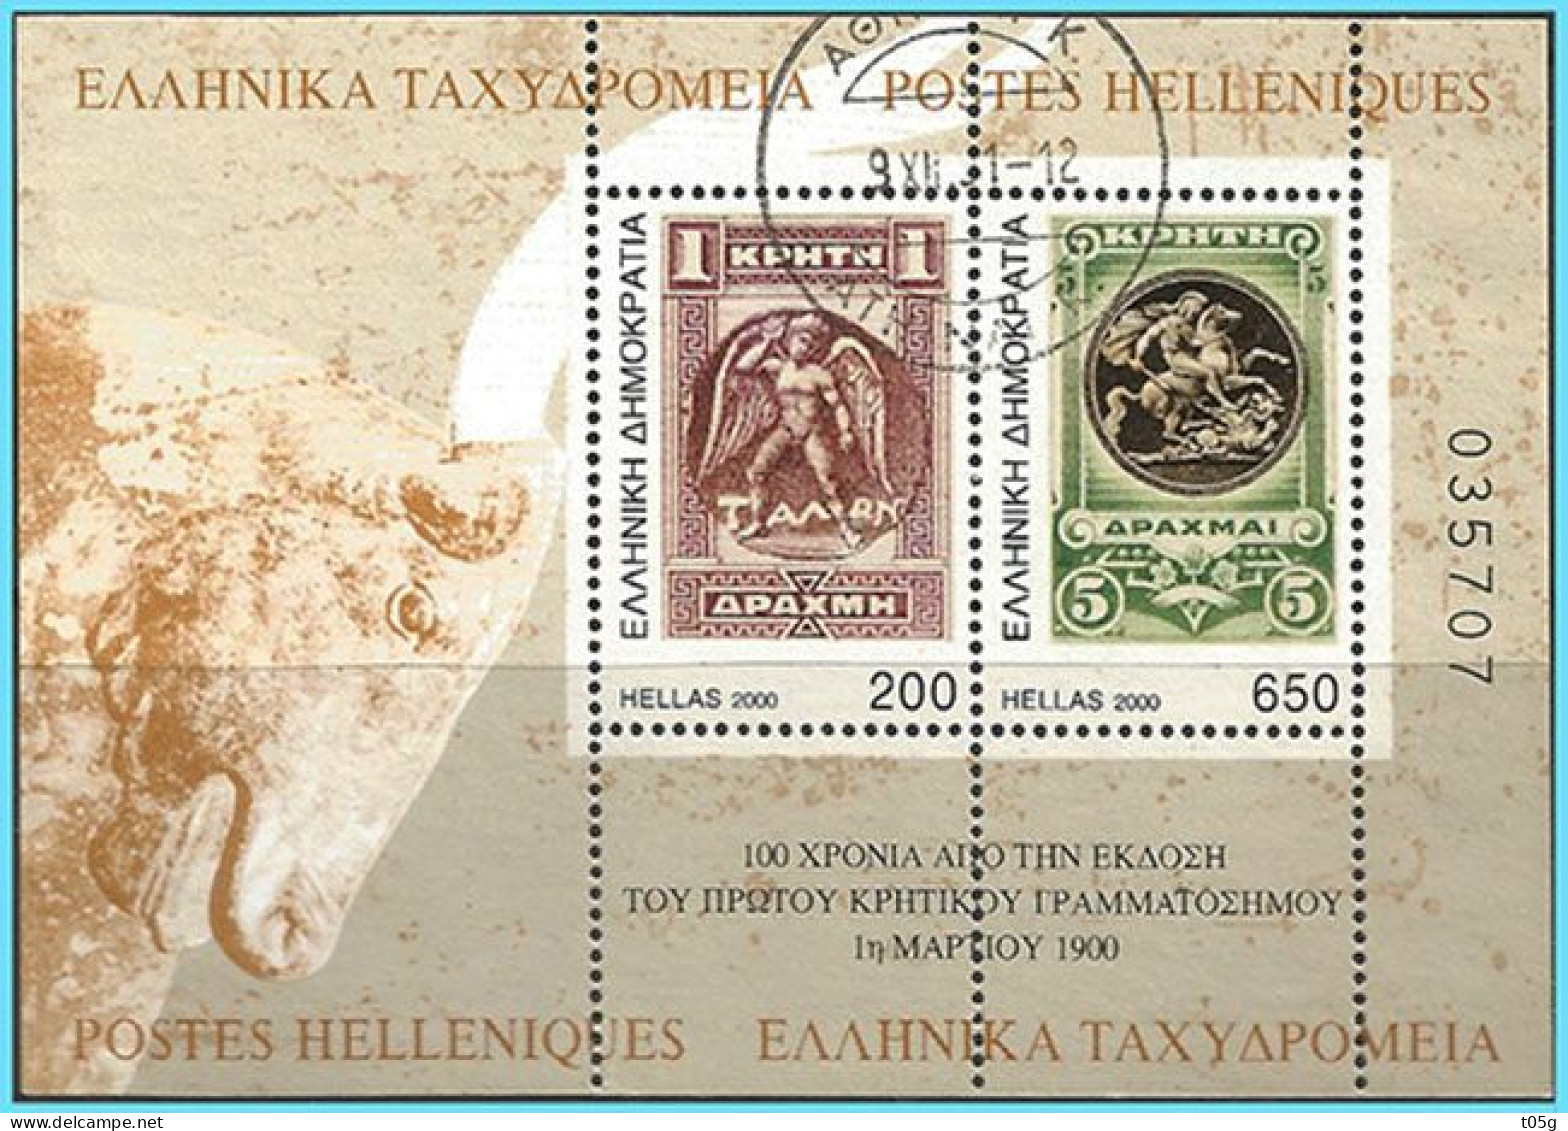 GREECE- GRECE- HELLAS 2000:  The Stamps Of Crete Miniature Sheet Used - Usati